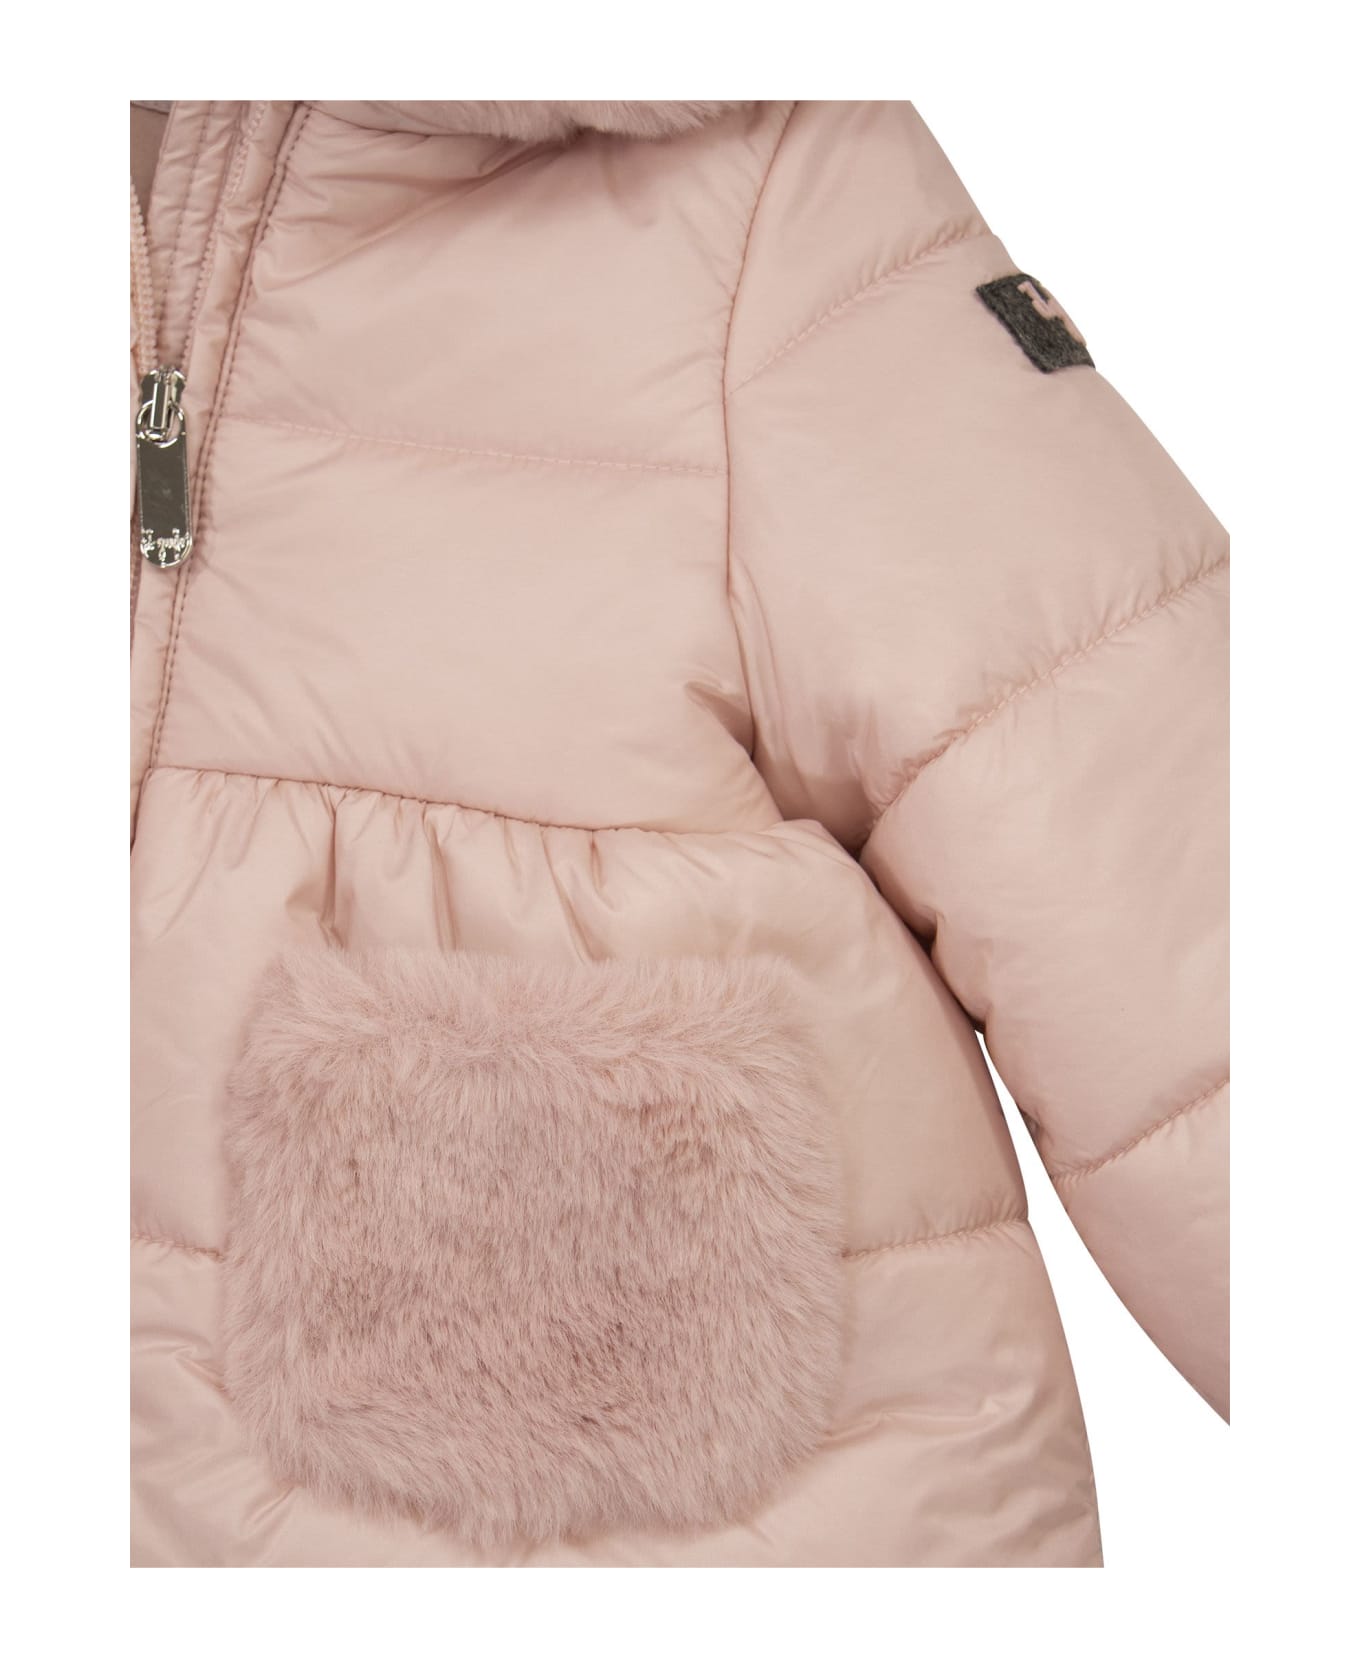 Il Gufo Long Jacket With Hood And Pompom - Pink コート＆ジャケット